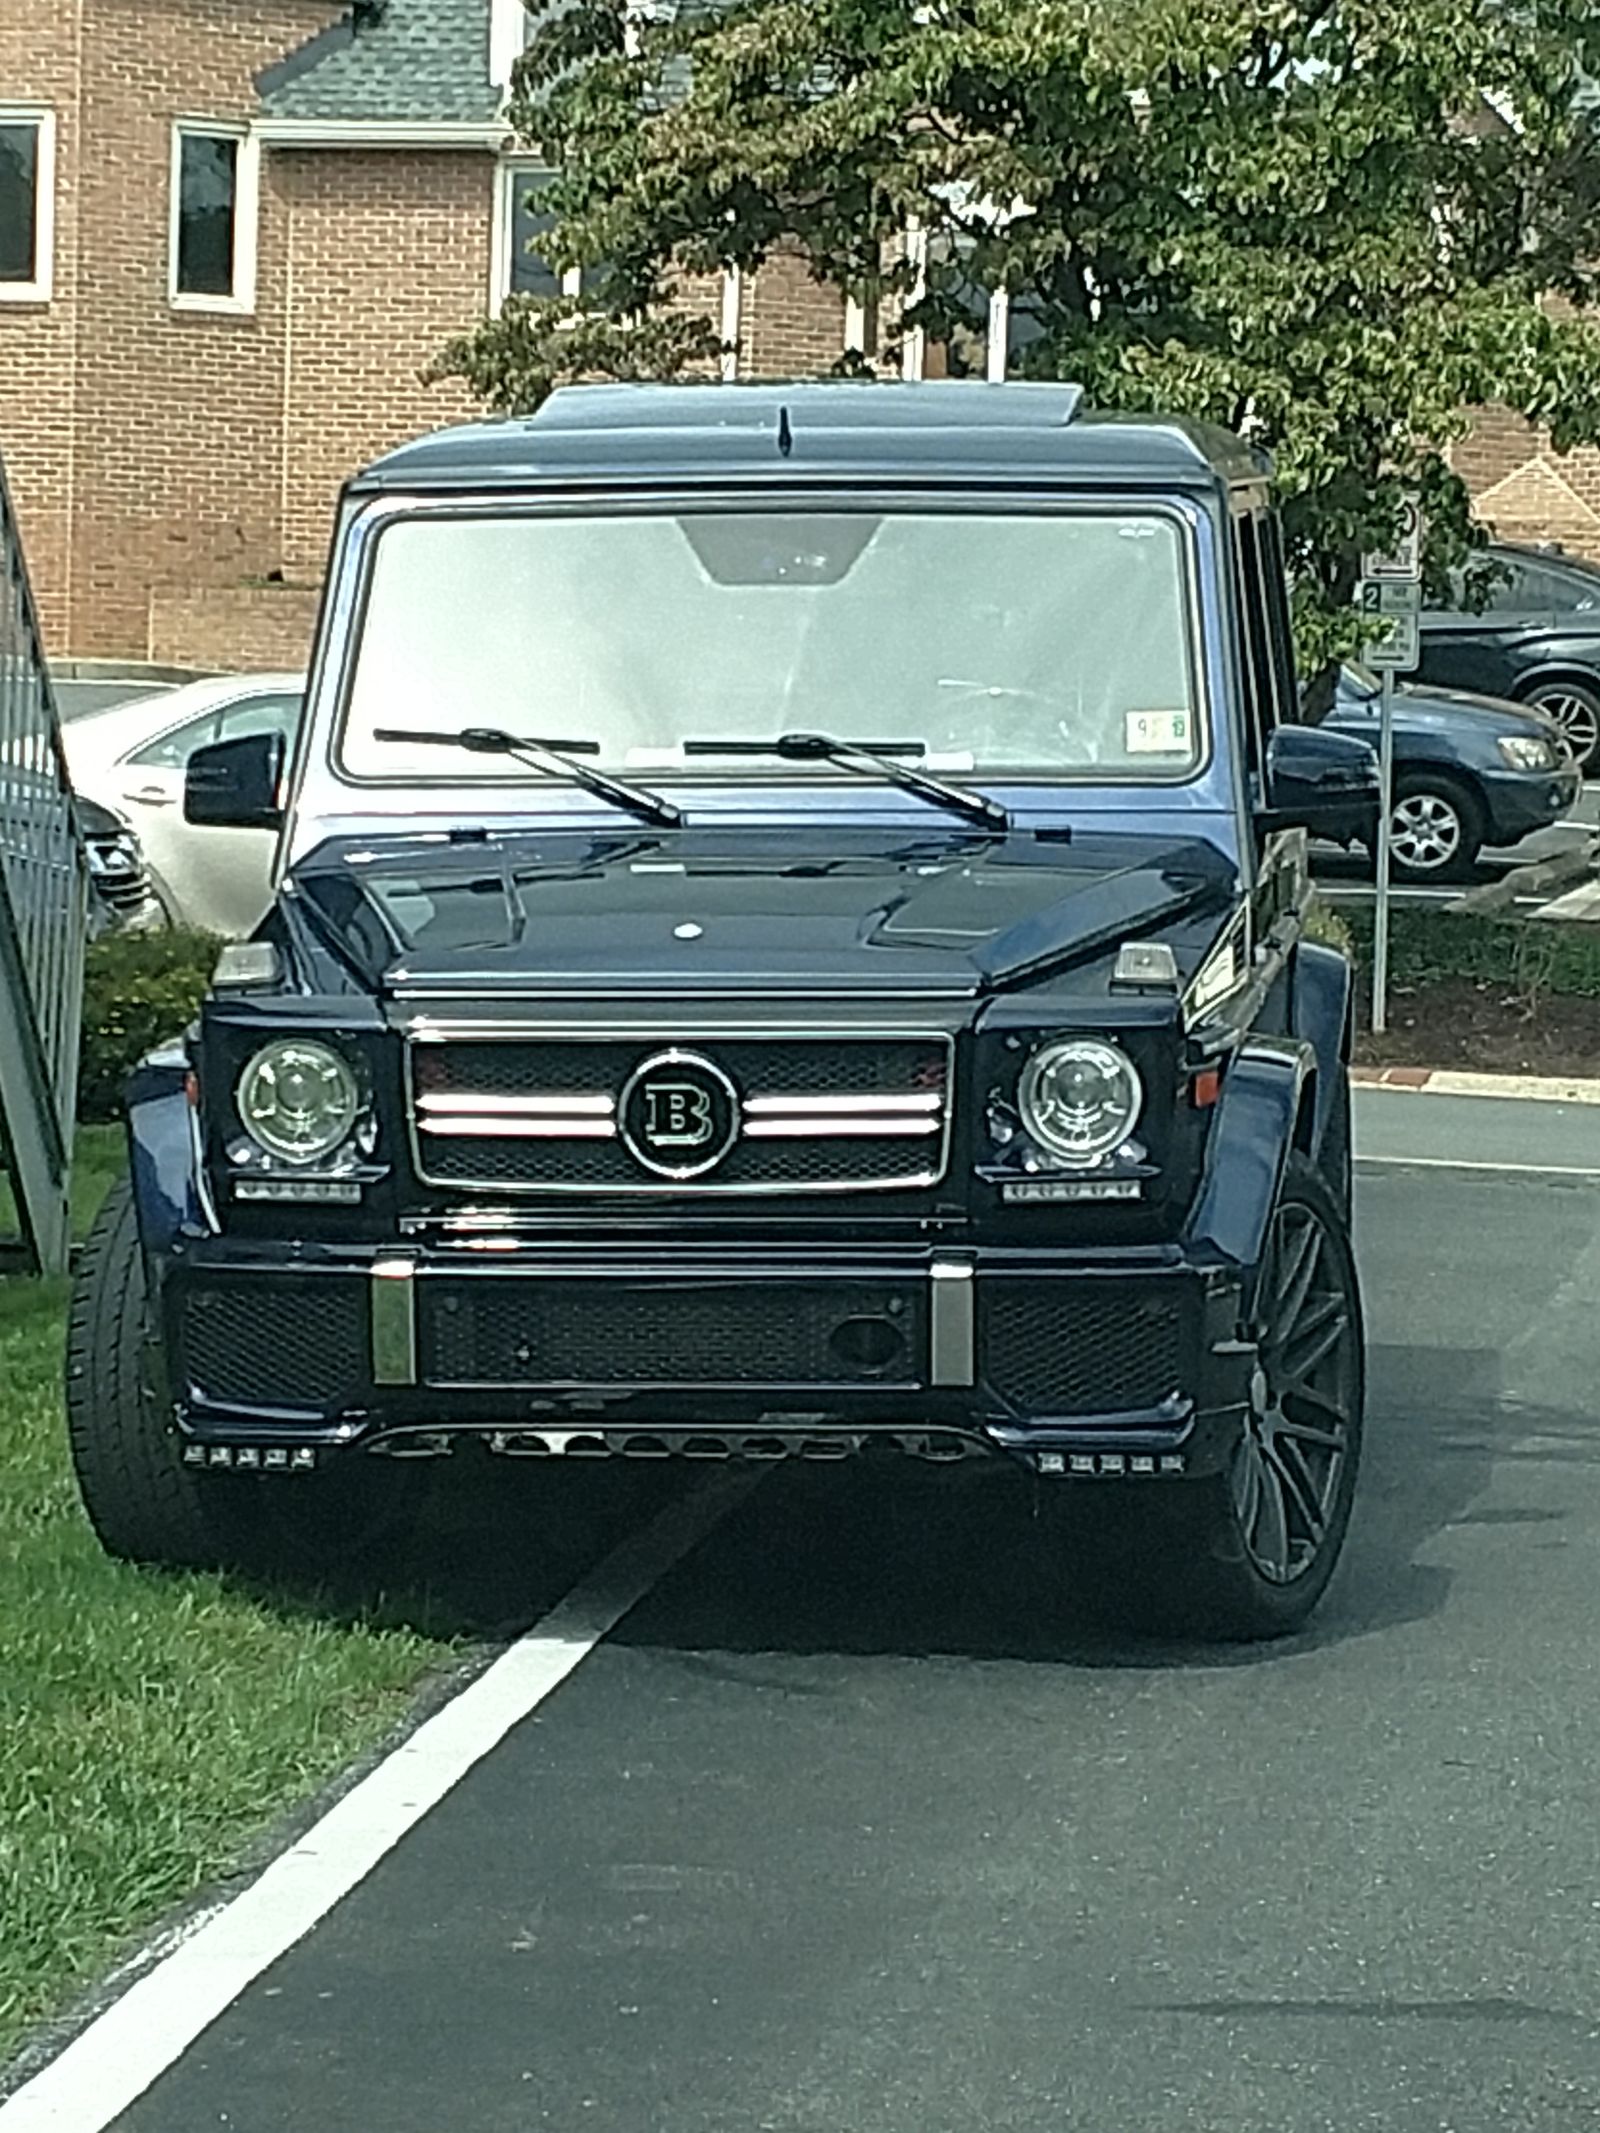 Not sure if real brabus